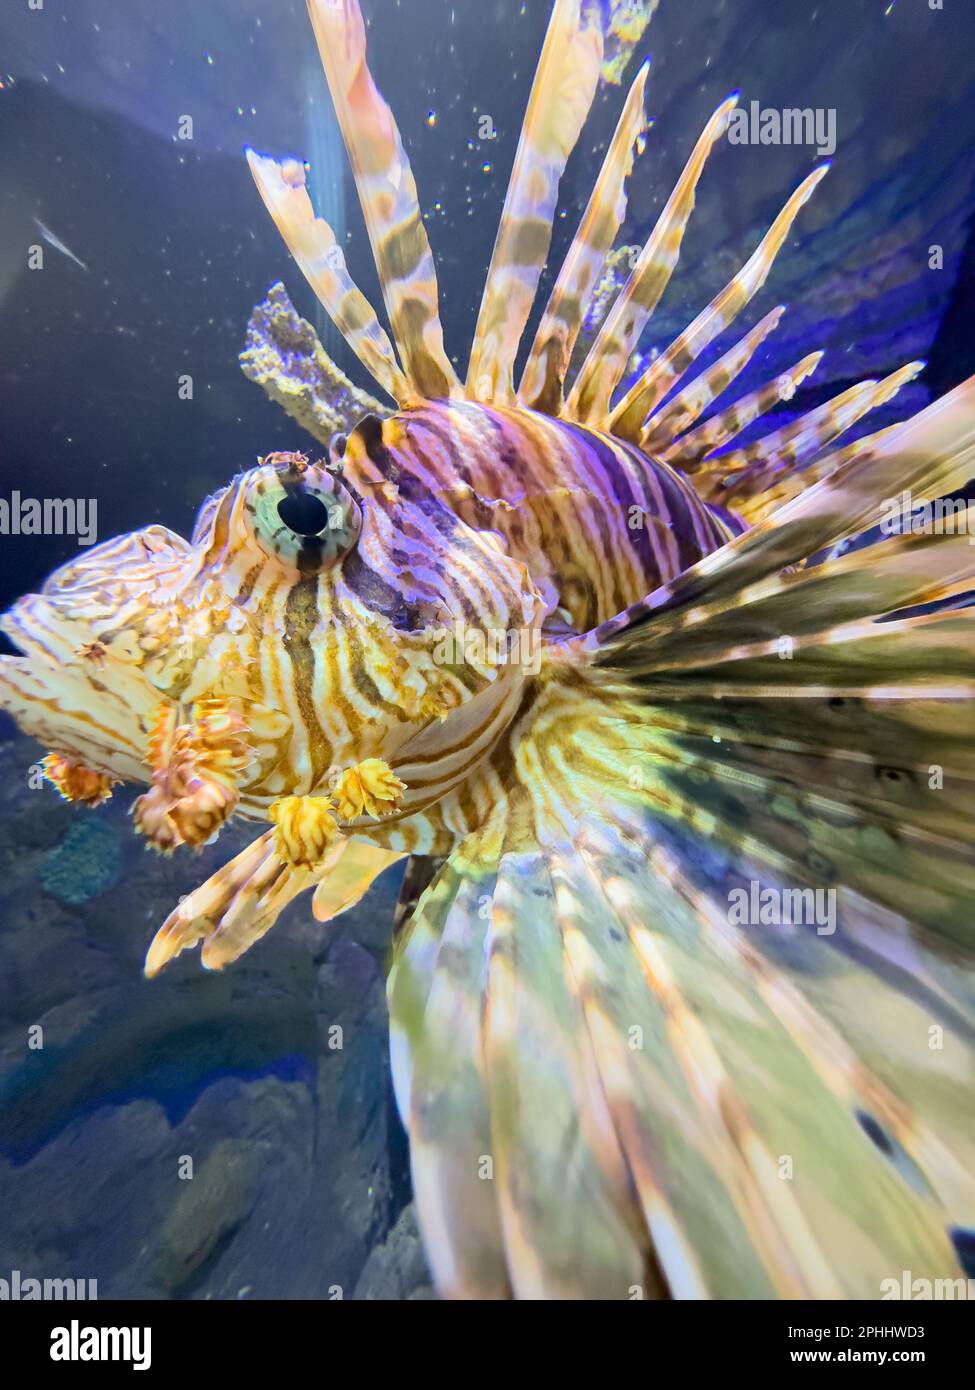 Underwater photo of a Poisonous Lionfish Stock Photo - Alamy